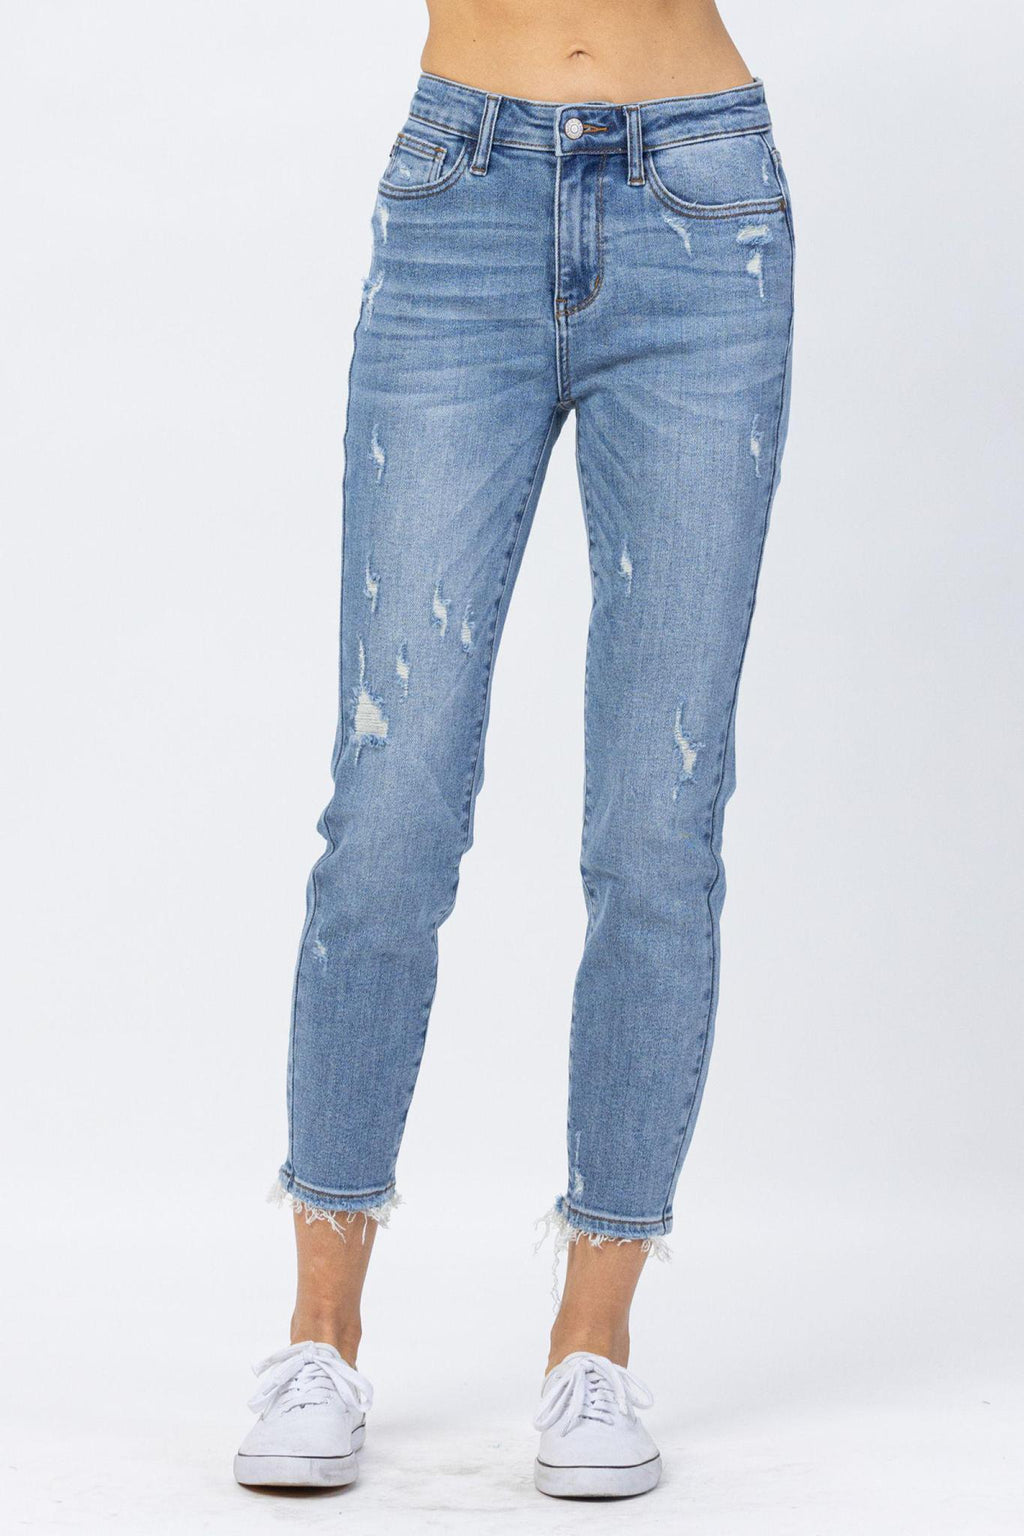 HI-RISE MINERAL WASH RELAXED FIT JUDY BLUE JEANS